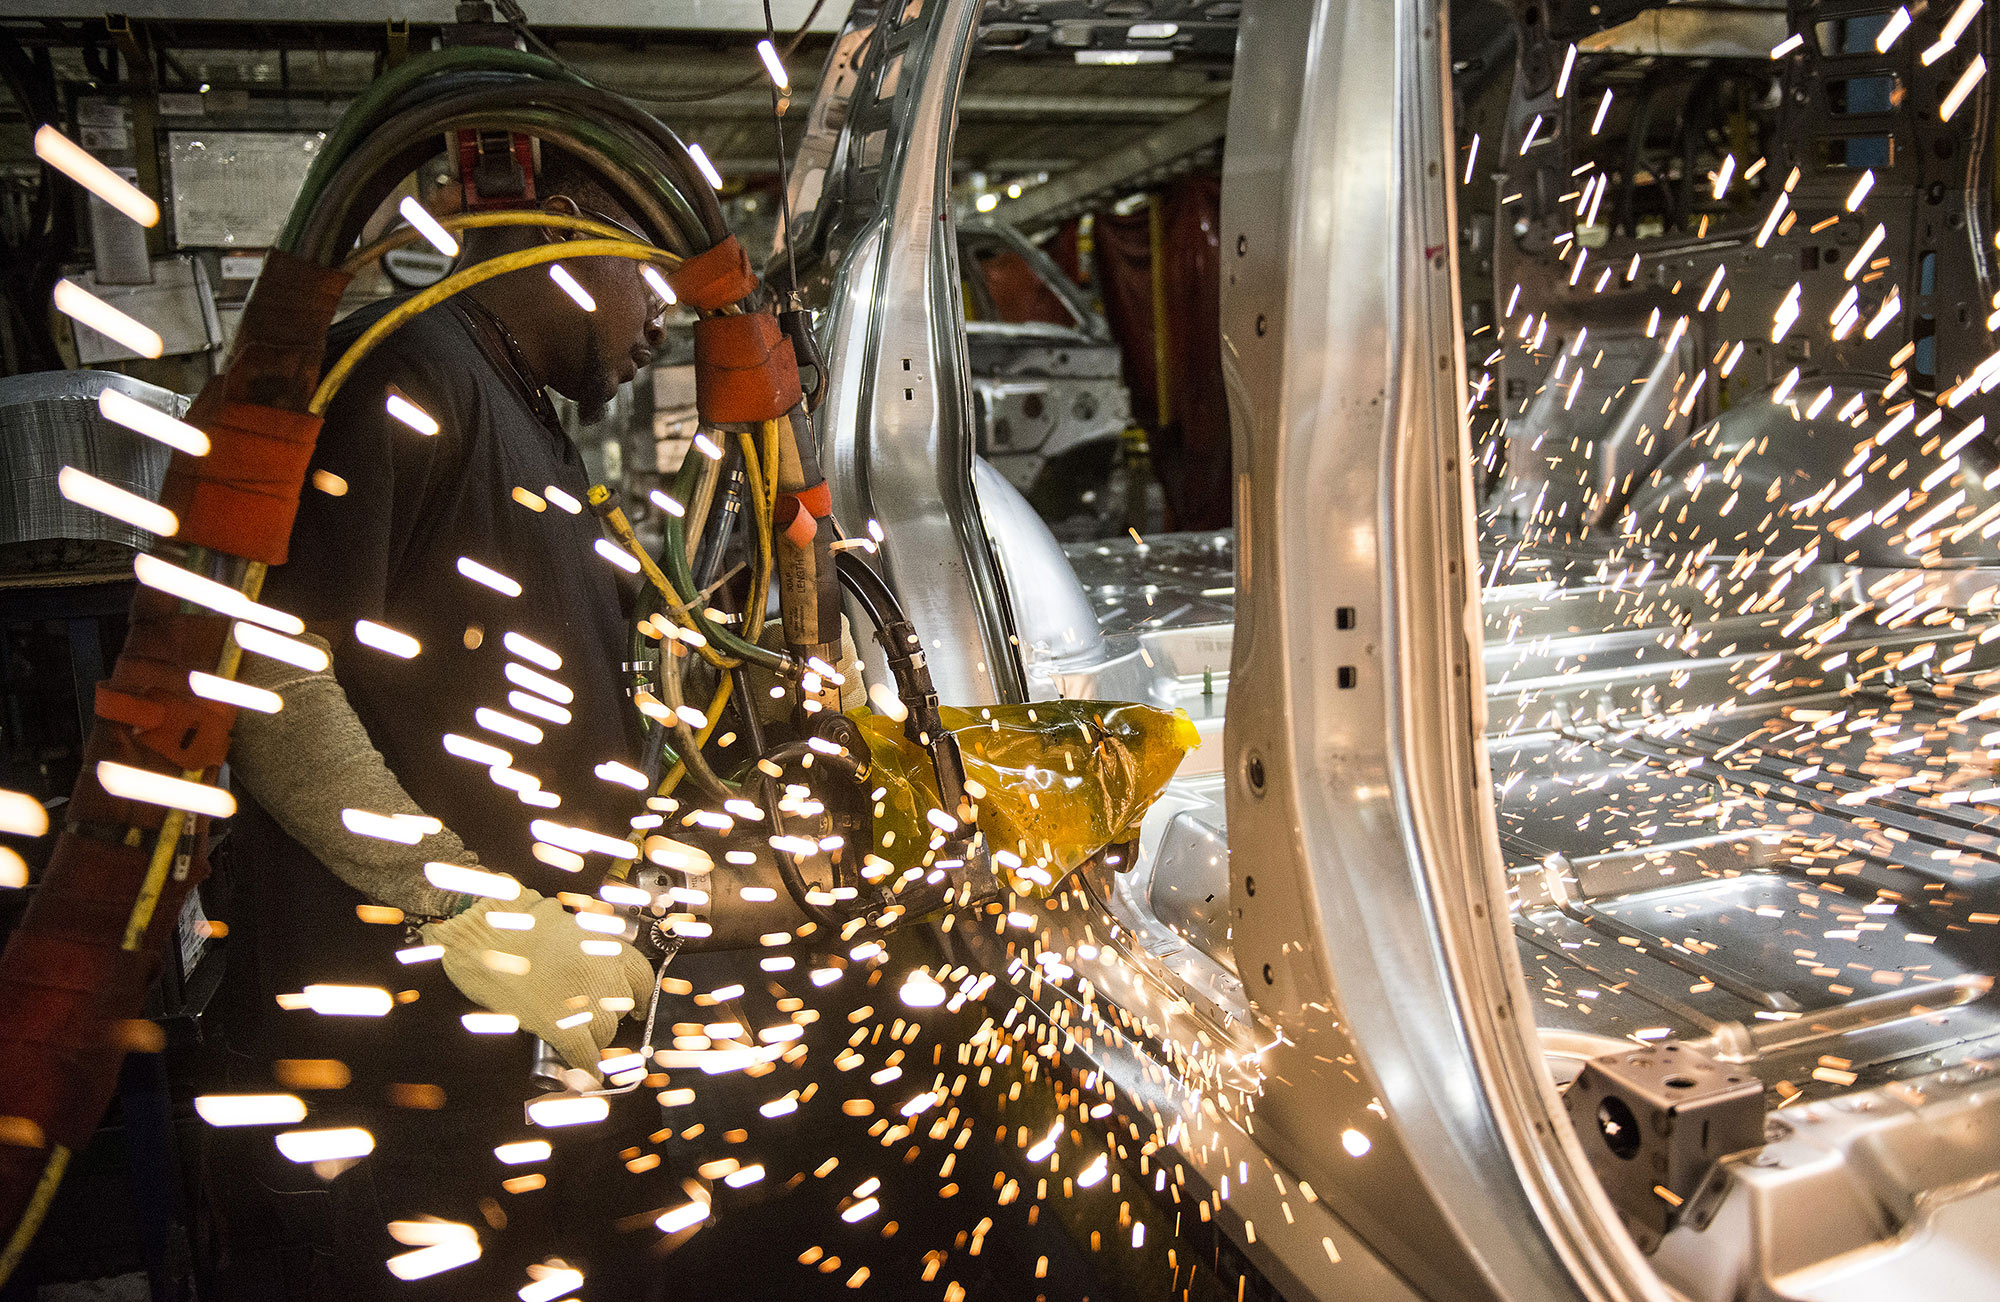 An employee welds together a frame for a sports utility vehicle (SUV) during production at the General Motors Co. (GM) assembly plant in Arlington, Texas, U.S., on Thursday, March 10, 2016. The U.S. Census Bureau is scheduled to release business inventories figures on March 15.
